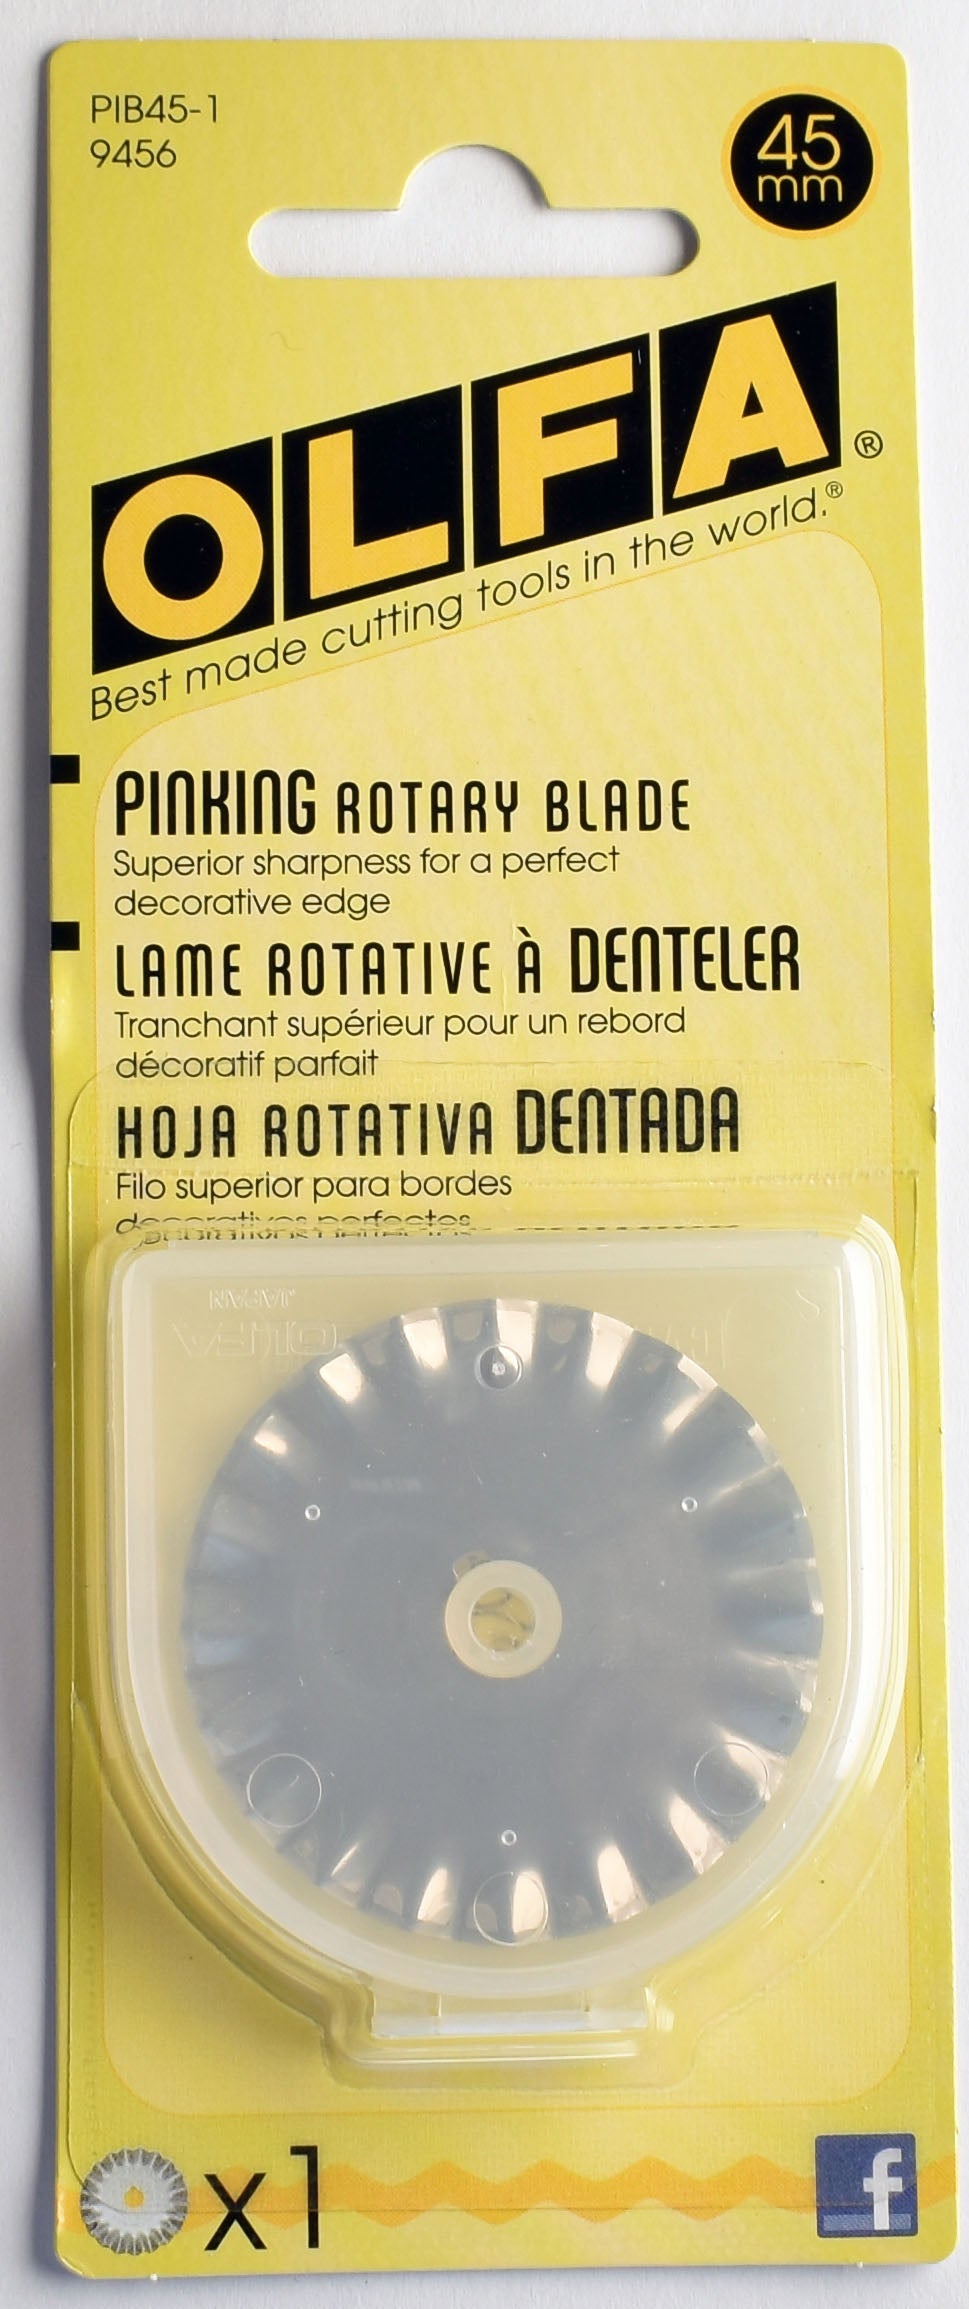 Olfa 45mm, Pinking Rotary Blade Refill (Pack of 1)